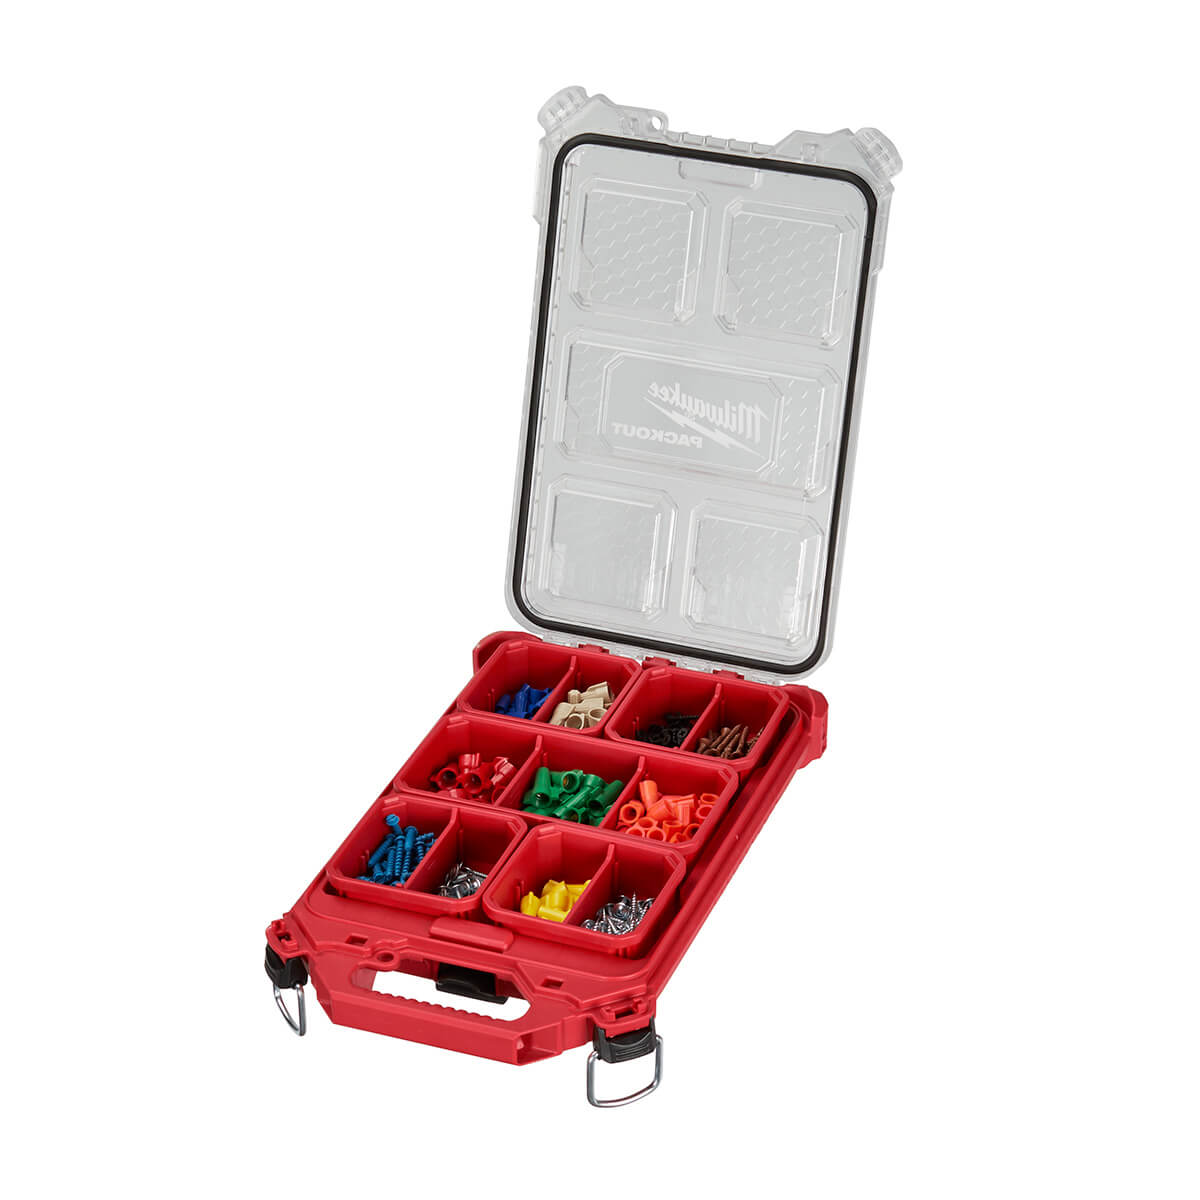 Miwlaukee 48-22-8436 - PACKOUT Low-Profile Compact Organizer - wise-line-tools